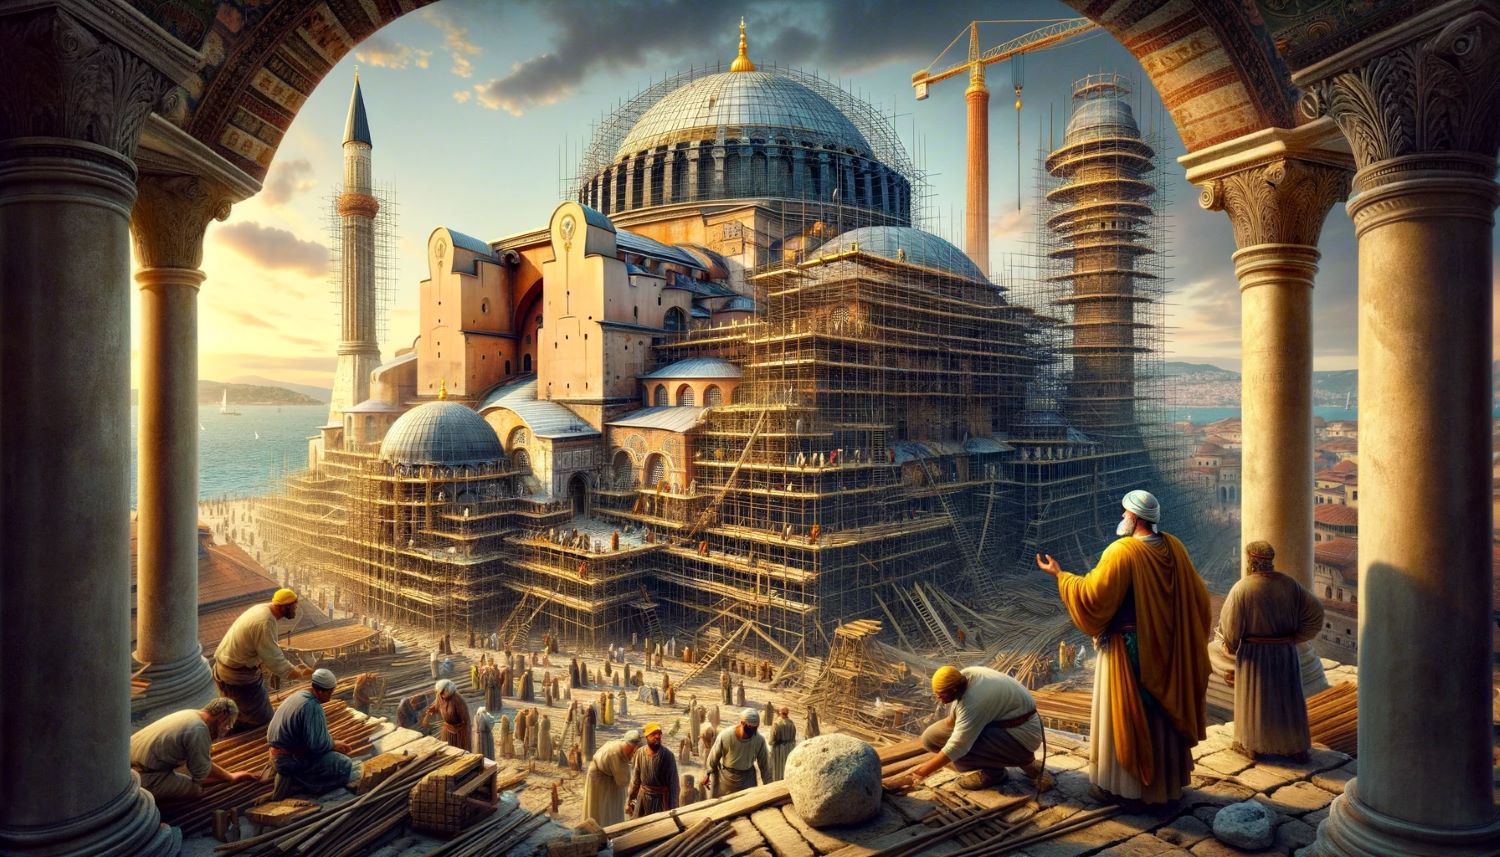 Which Cathedral Did Justinian Have Built In Constantinople?